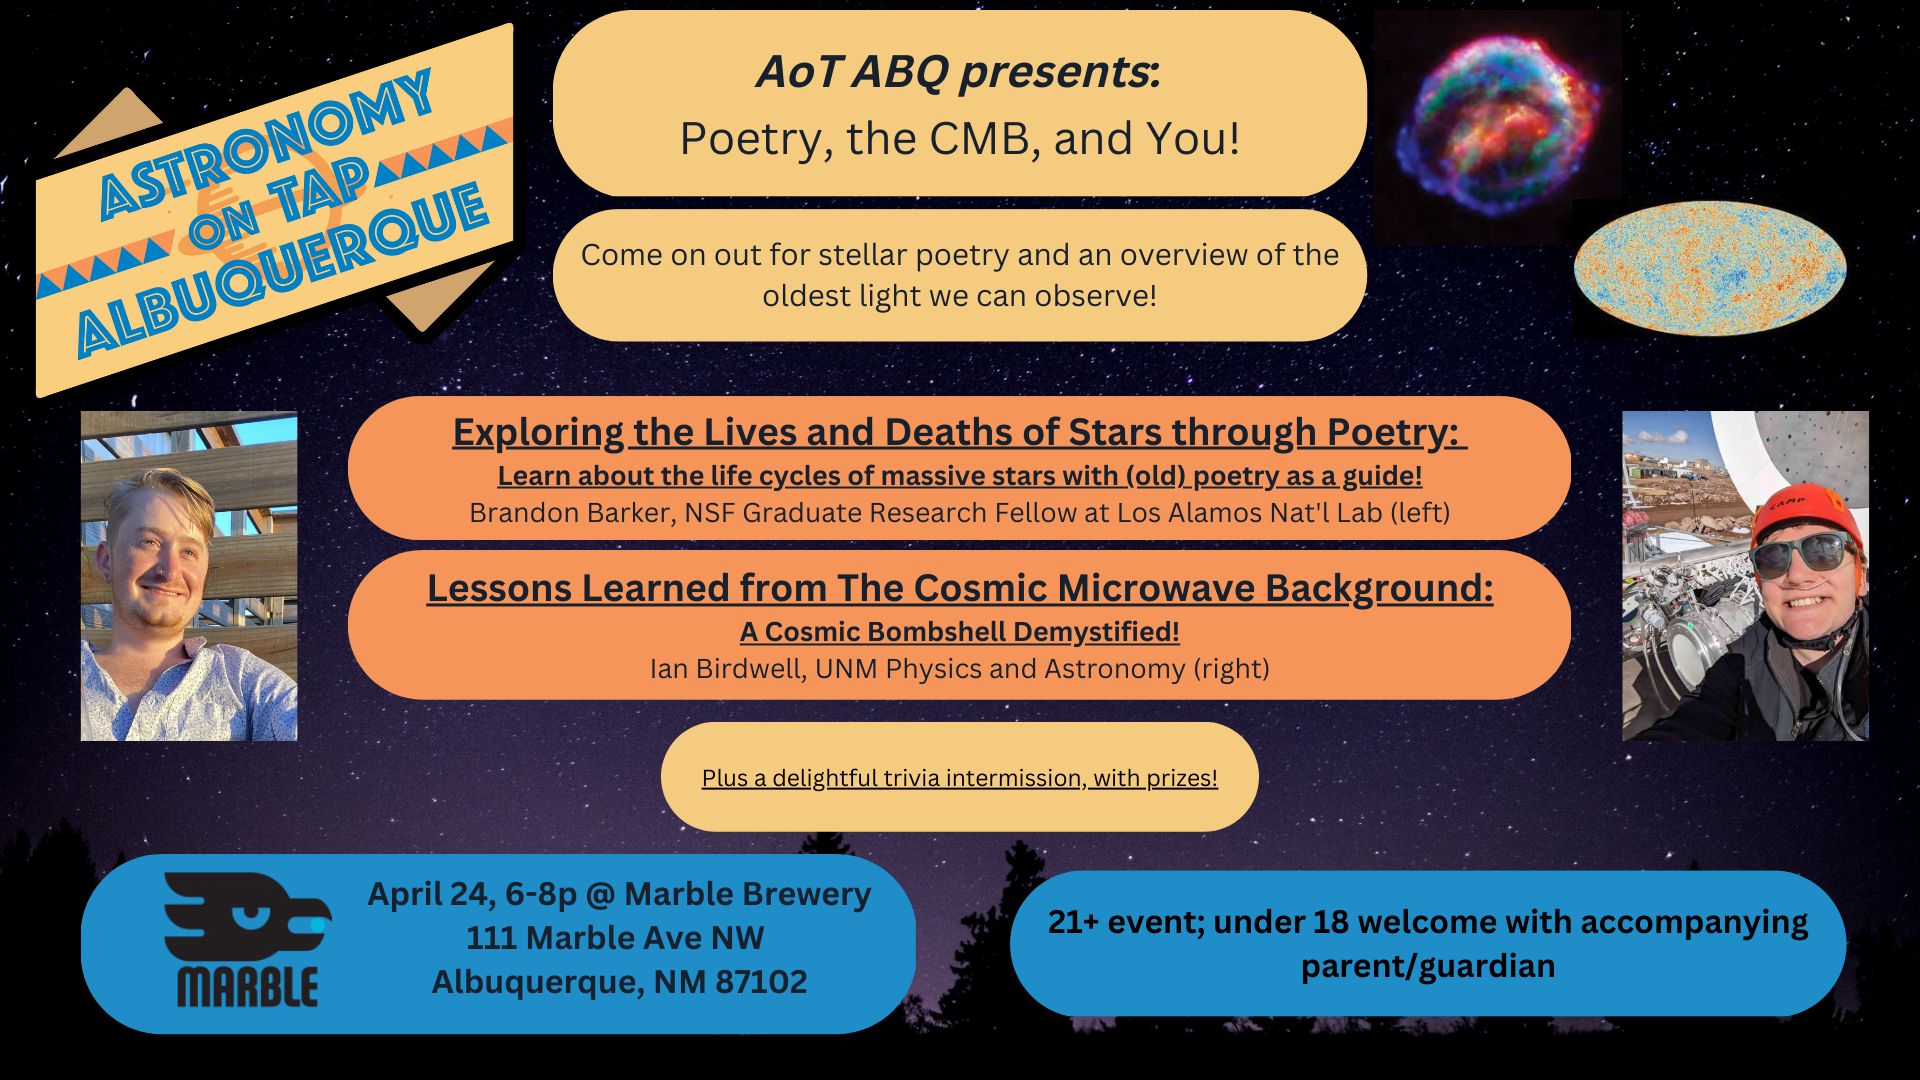 Flyer describing Astronomy on Tap event in Albuquerque, NM on April 24, 2023